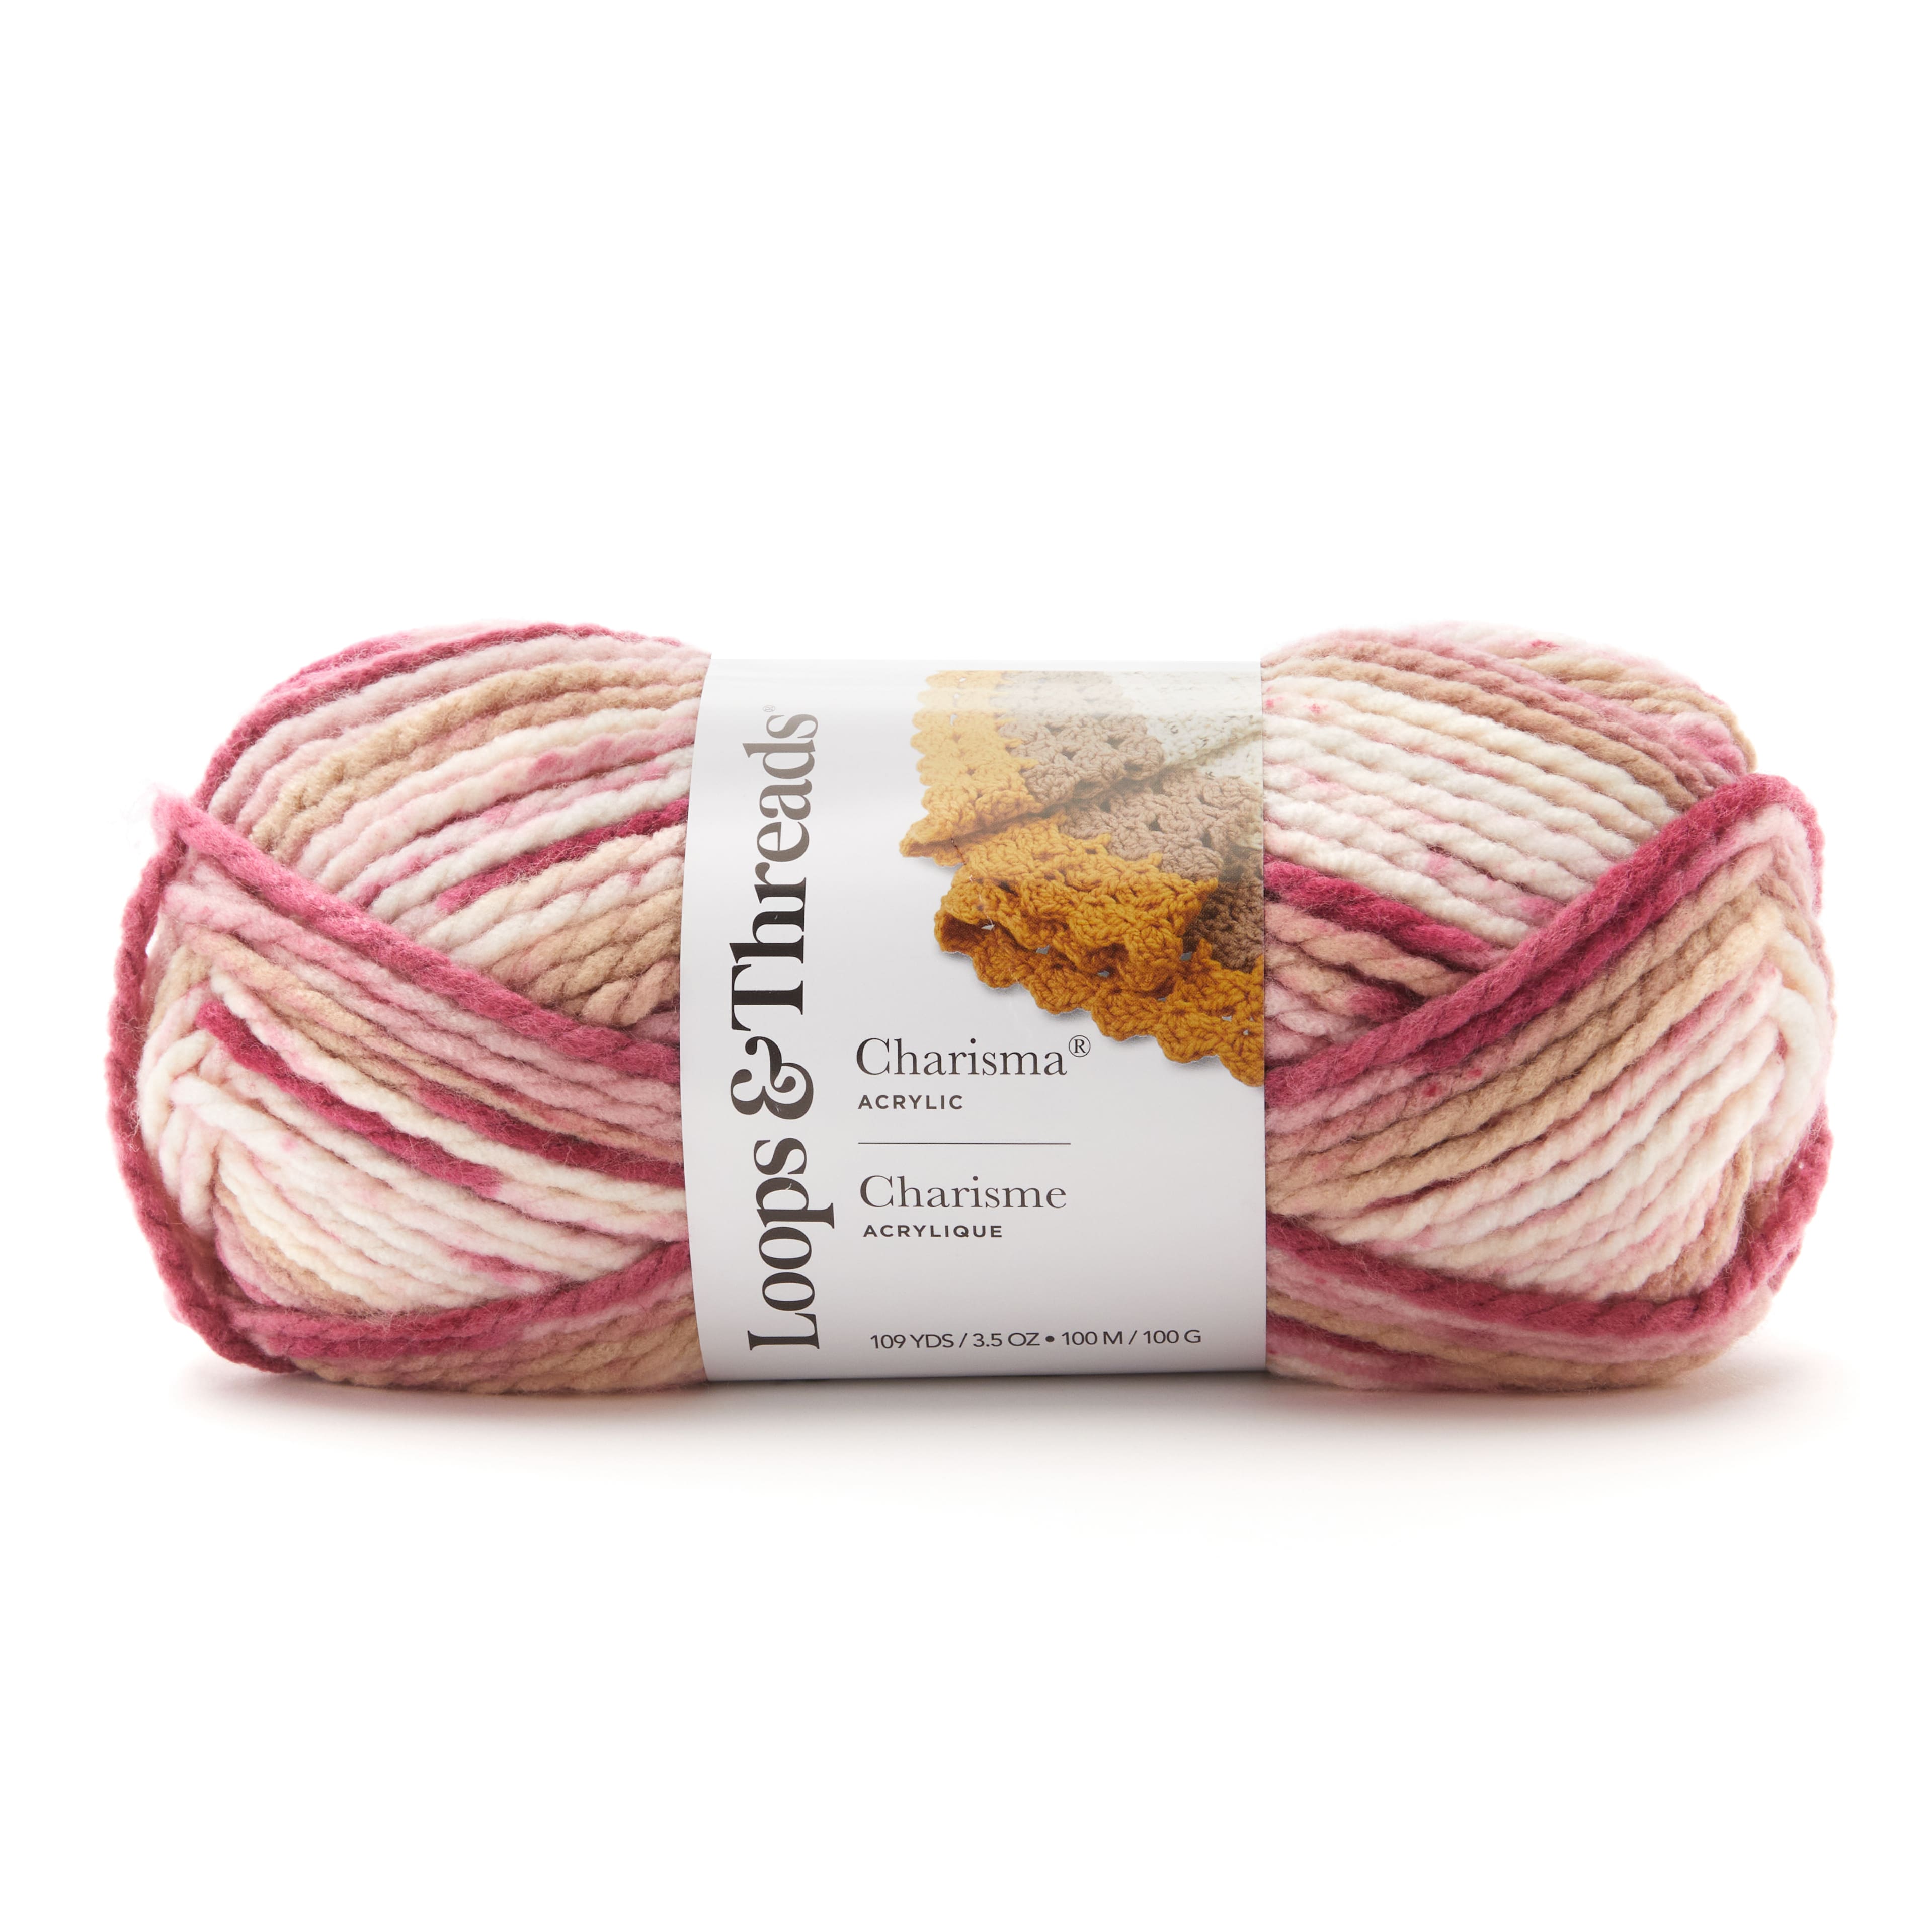 New ⭐ Natural Marl™ Yarn by Loops & Threads® ⌛